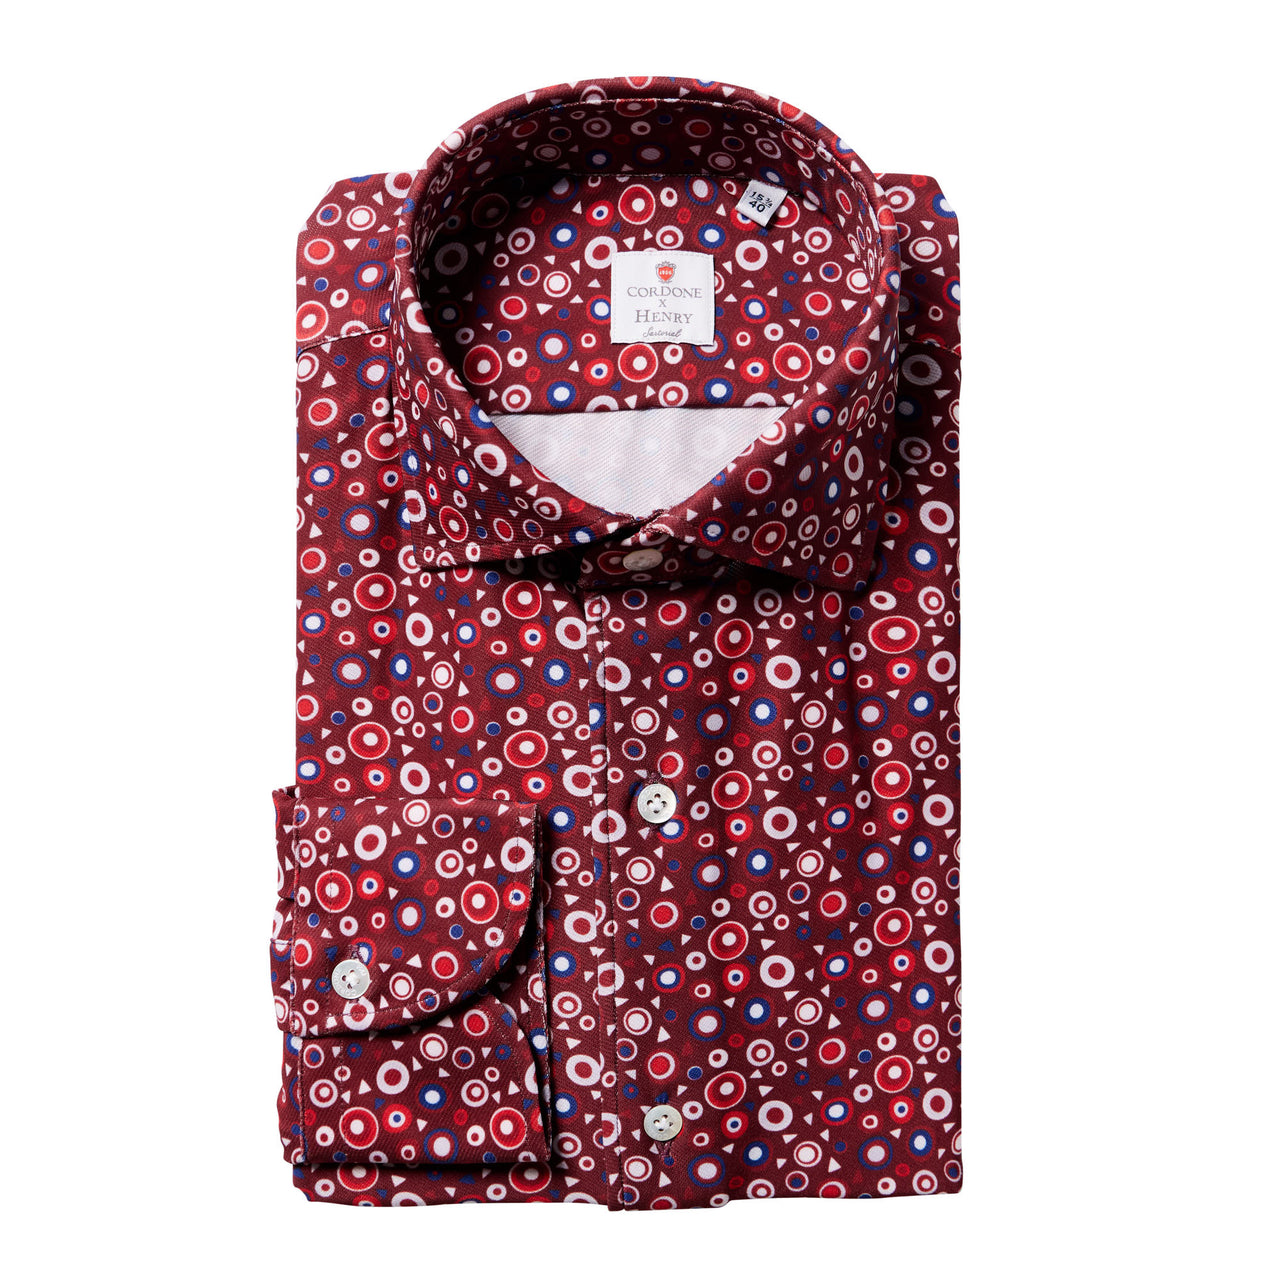 CORDONE Flower Printed Shirt Single Cuff Classic Fit RED/WHITE/BLUE